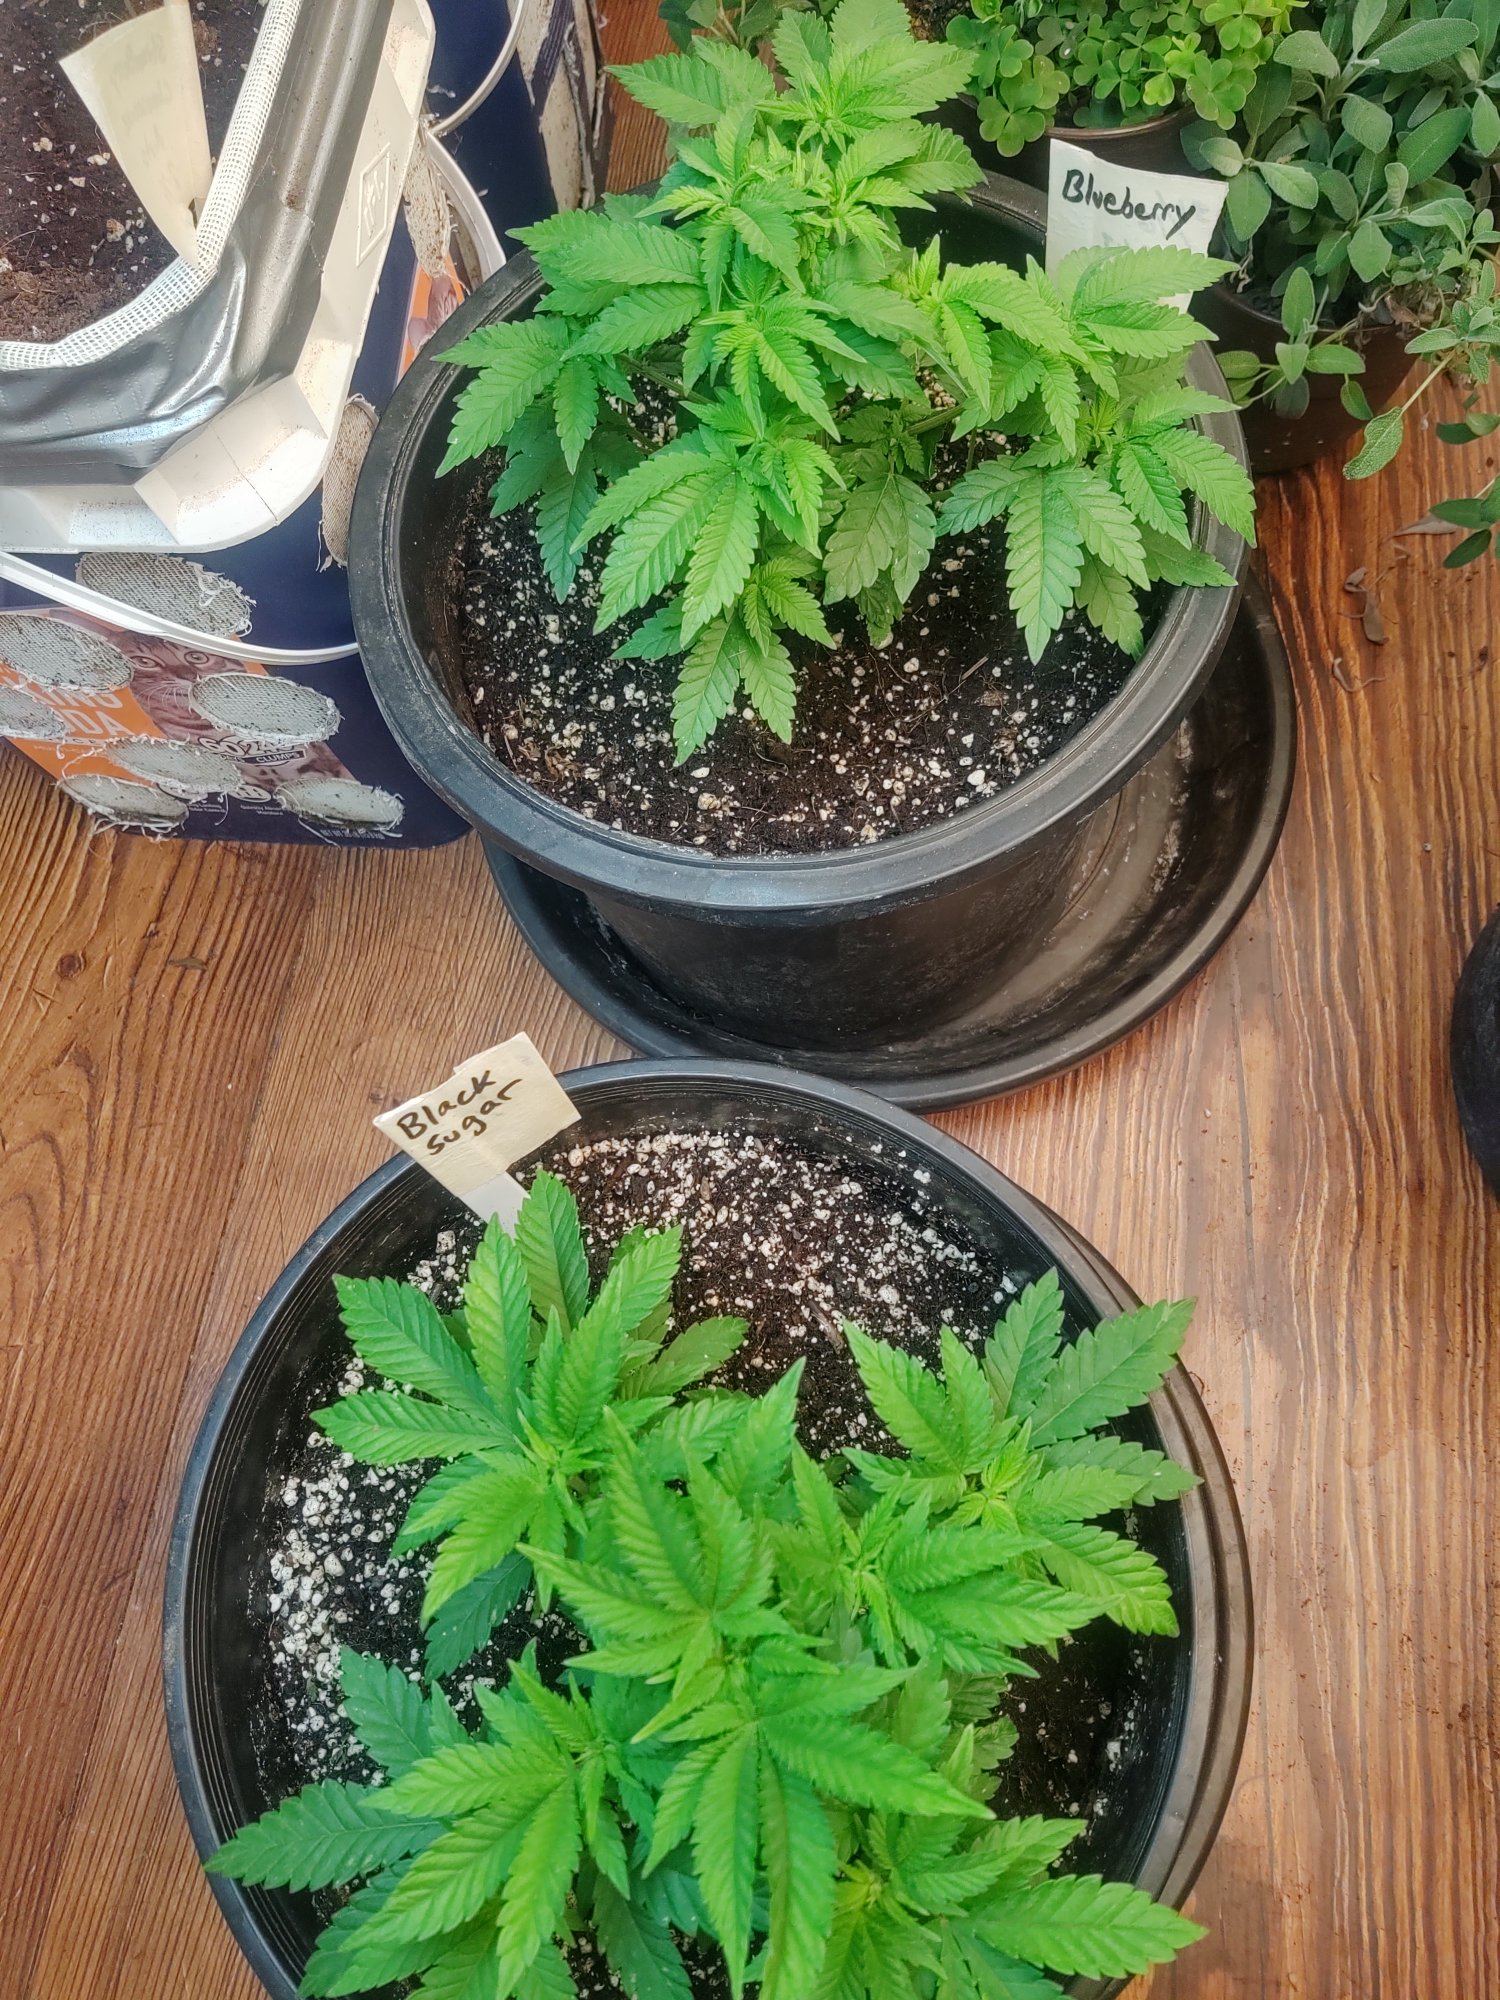 Issues with slowed growth and spots 6